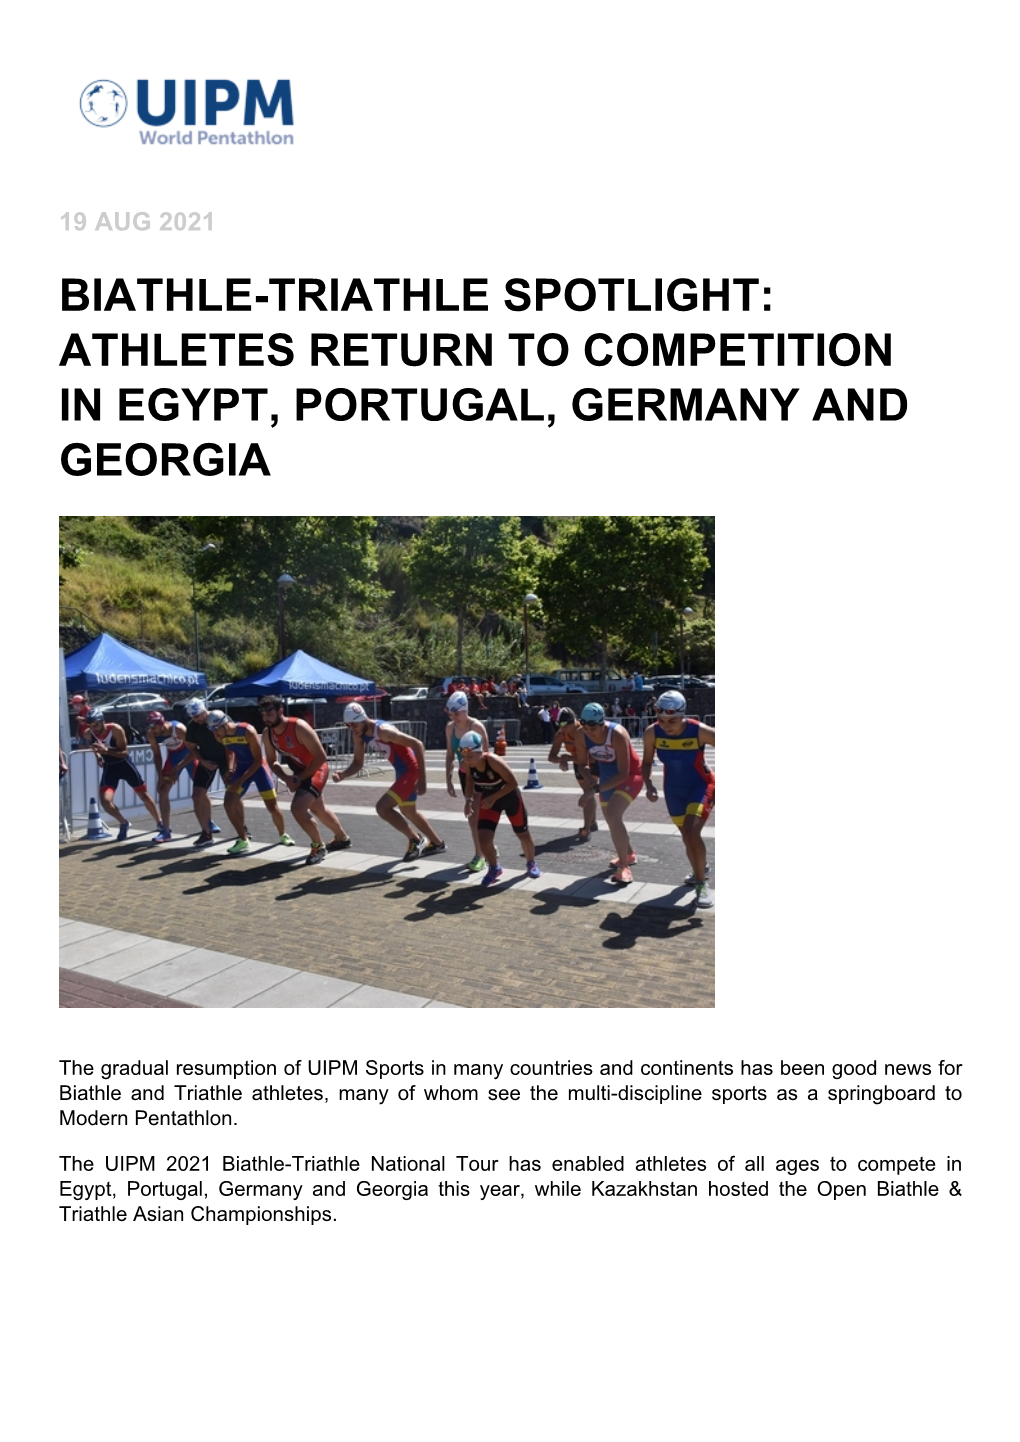 Biathle-Triathle Spotlight: Athletes Return to Competition in Egypt, Portugal, Germany and Georgia